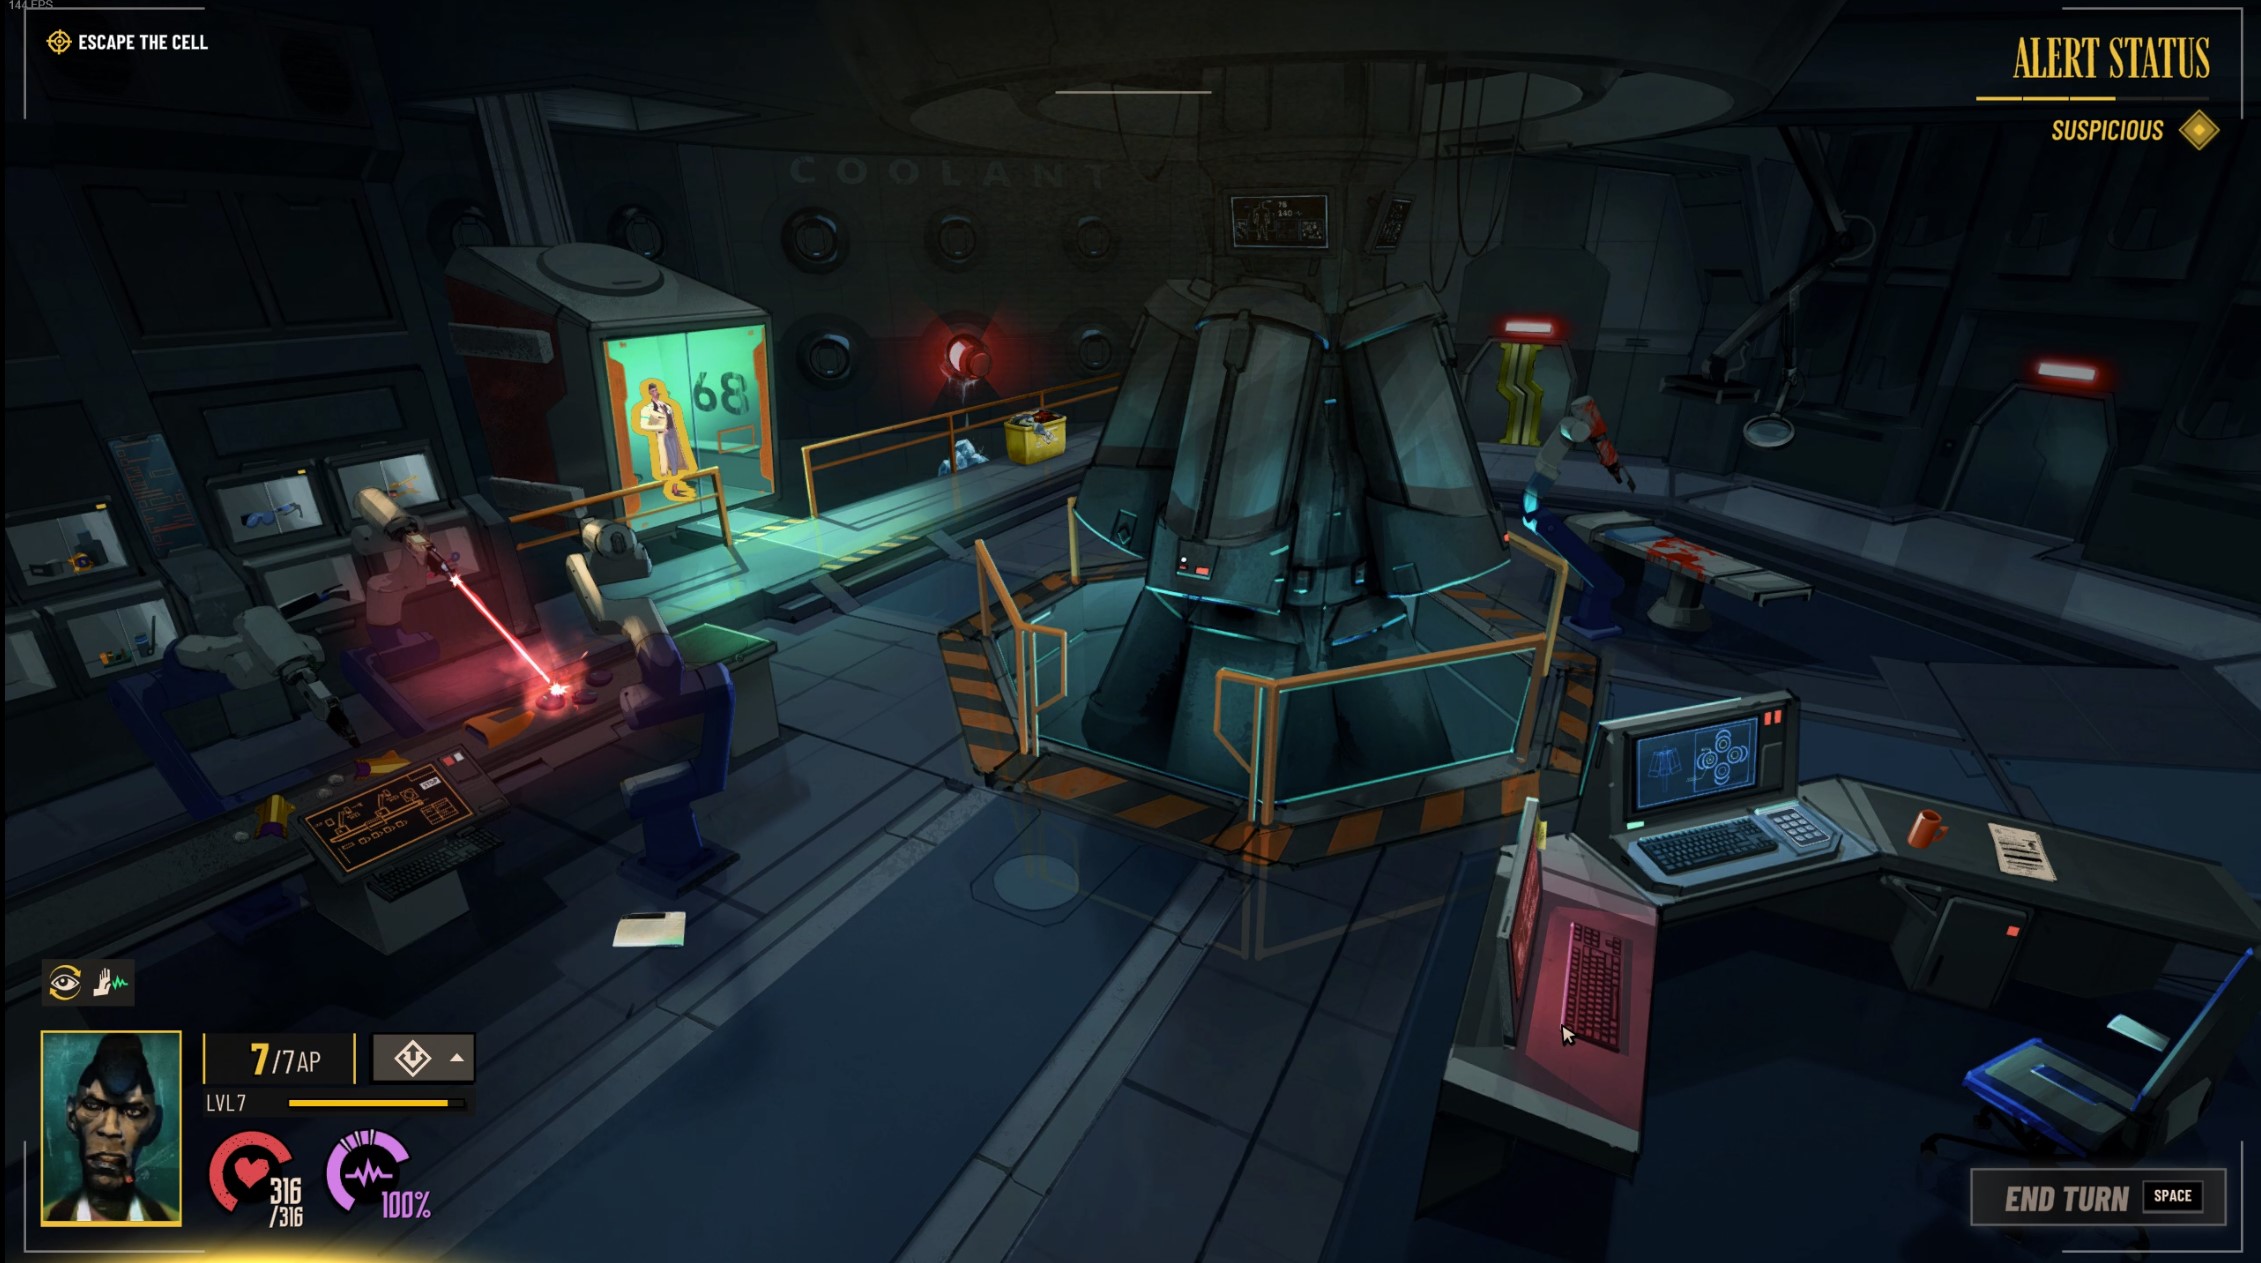 Isometric view of complicated cryo lab, Frank is trapped in a cell in the upper left.